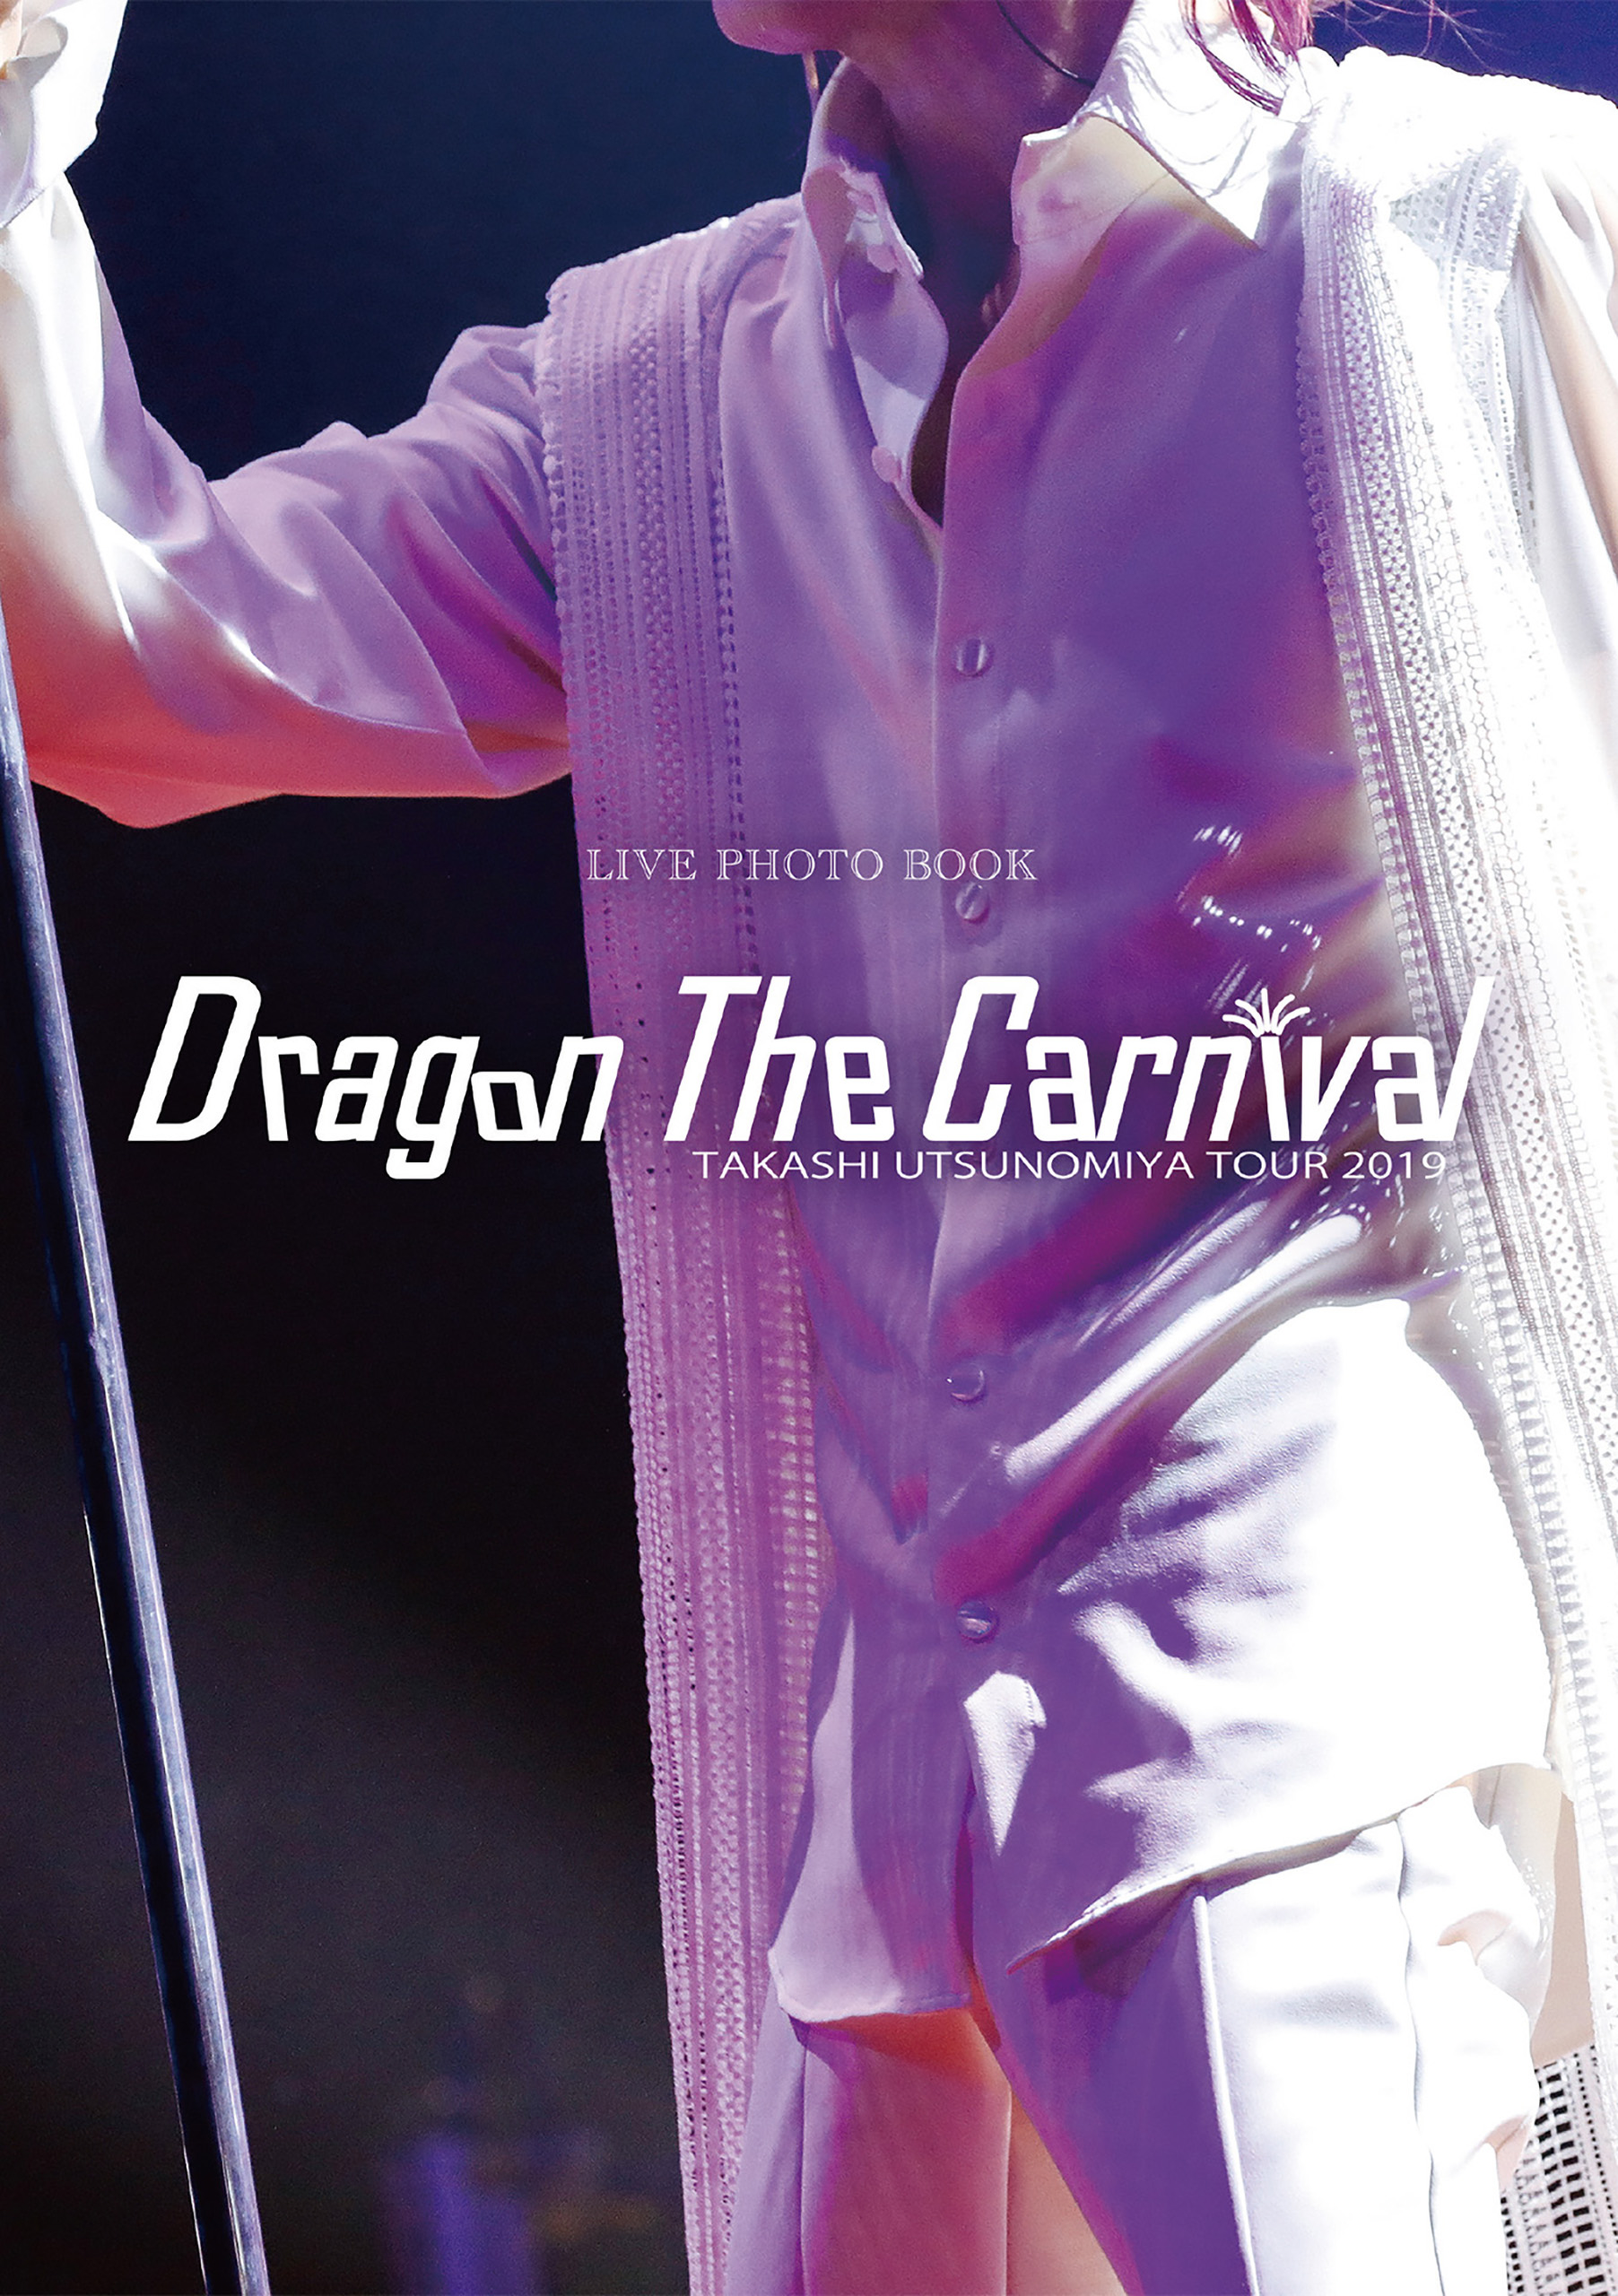 FC限定版 宇都宮隆/Tour 2019 Dragon The Carnival - ミュージック